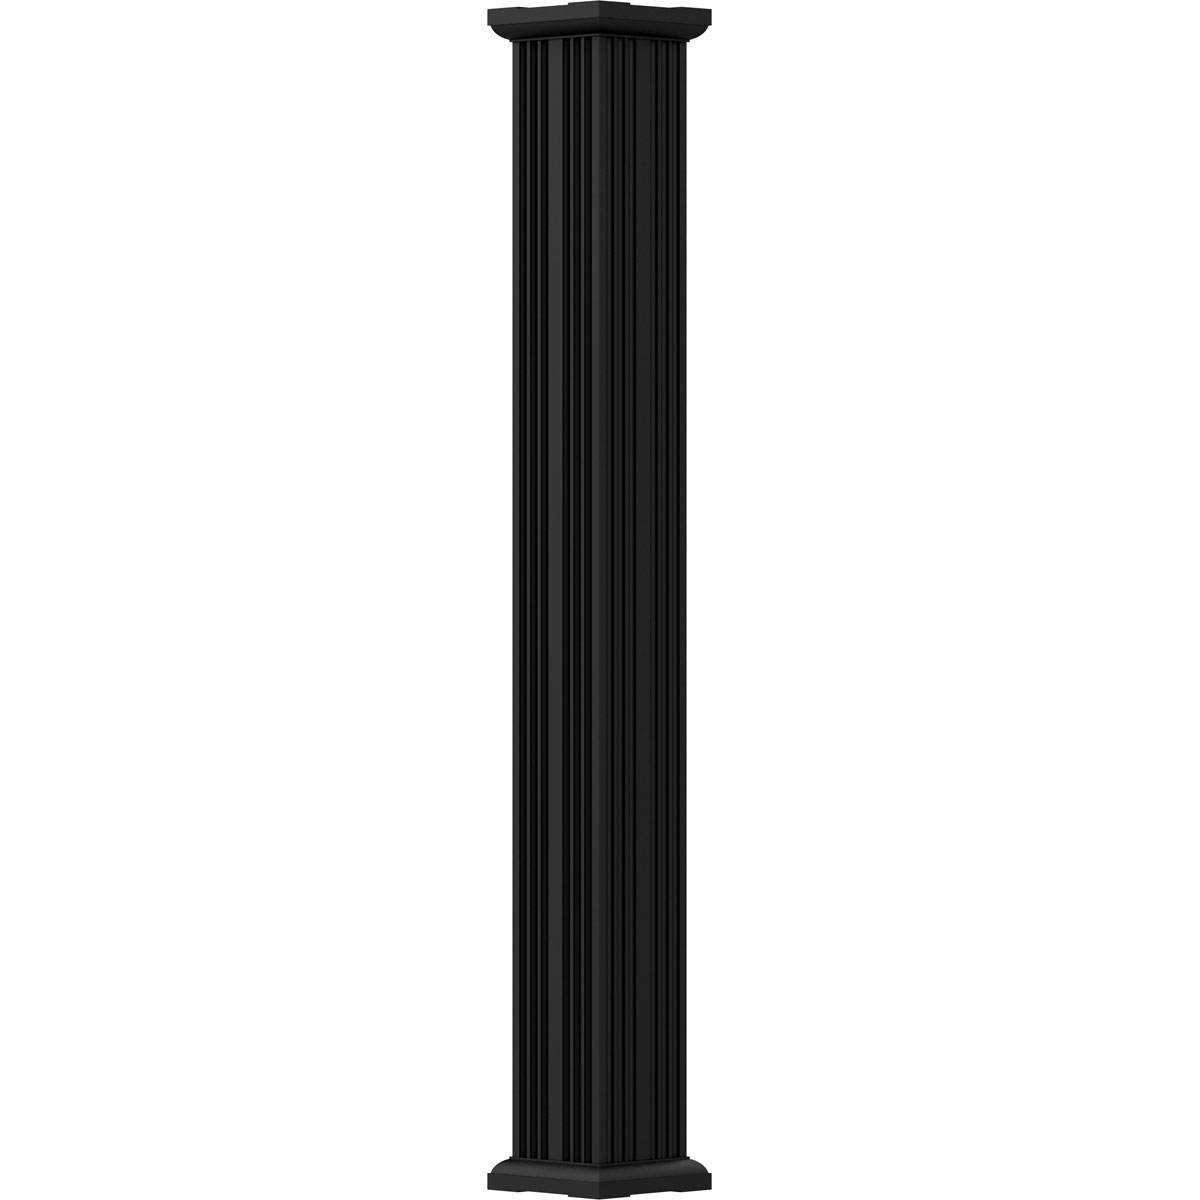 6 x 9' Endura-Aluminum Column, Square Shaft (For Post Wrap Installation),  Non-Tapered, Fluted, Textured Black Finish w/ Capital & Base 